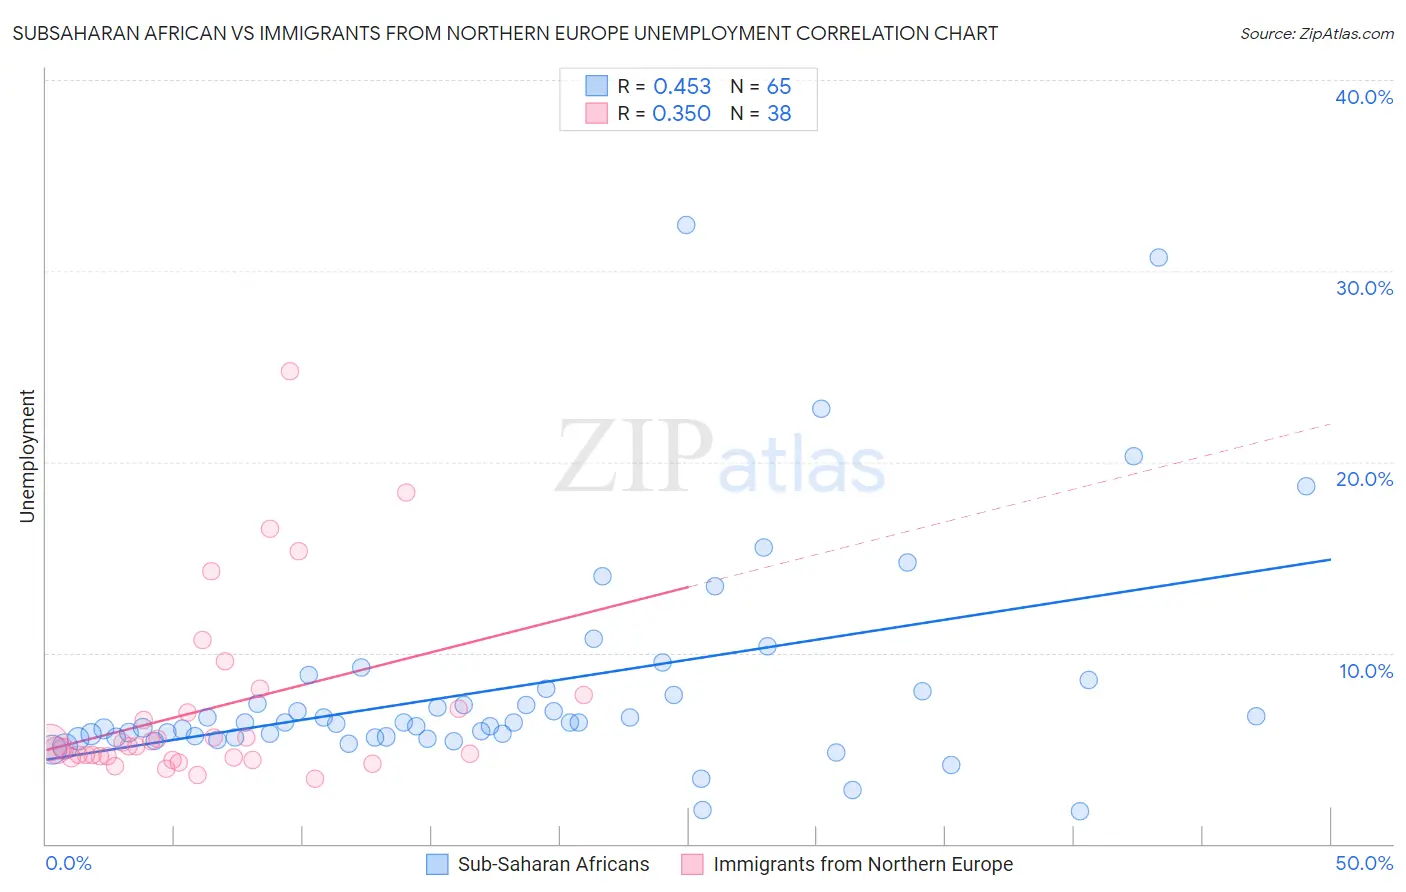 Subsaharan African vs Immigrants from Northern Europe Unemployment